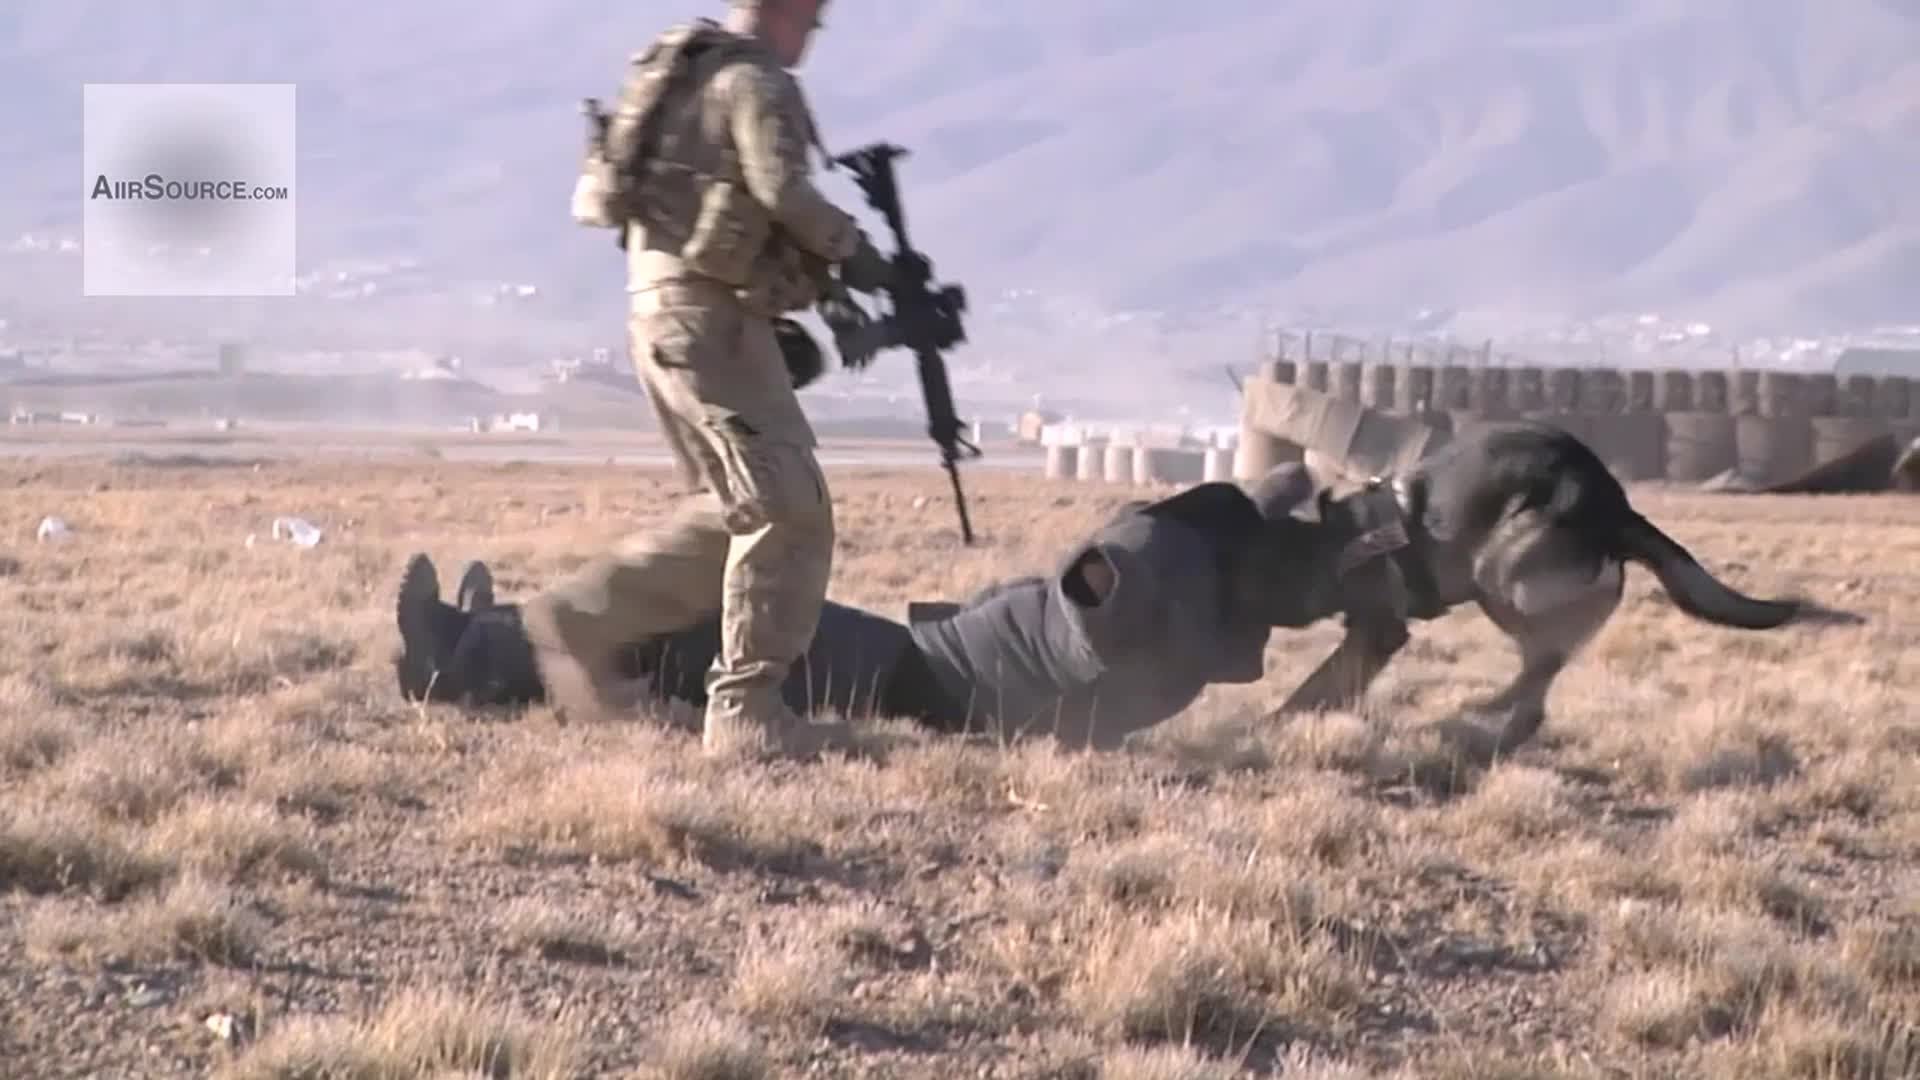 Military Working Dogs: K9 Drug/Vehicle Search - YouTube